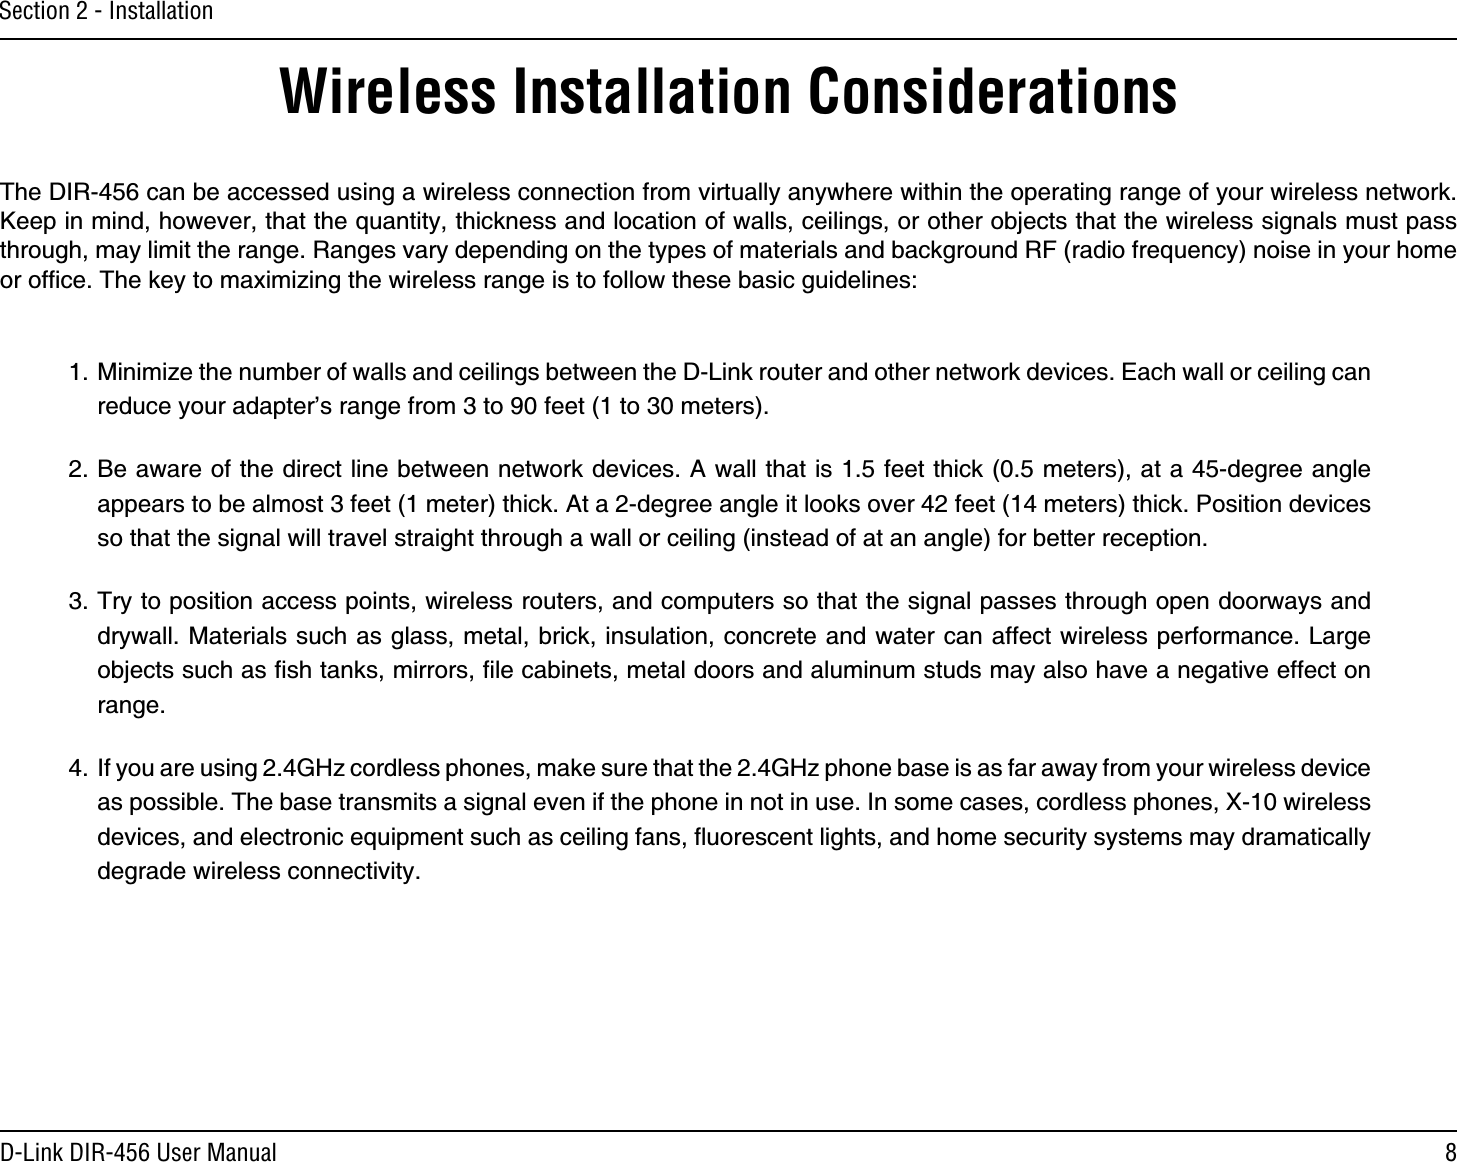 8D-Link DIR-456 User ManualSection 2 - InstallationWireless Installation ConsiderationsThe DIR-456 can be accessed using a wireless connection from virtually anywhere within the operating range of your wireless network. Keep in mind, however, that the quantity, thickness and location of walls, ceilings, or other objects that the wireless signals must pass through, may limit the range. Ranges vary depending on the types of materials and background RF (radio frequency) noise in your home or ofﬁce. The key to maximizing the wireless range is to follow these basic guidelines:1. Minimize the number of walls and ceilings between the D-Link router and other network devices. Each wall or ceiling can reduce your adapter’s range from 3 to 90 feet (1 to 30 meters).2. Be aware of the direct line between network devices. A wall that is 1.5 feet thick (0.5 meters), at a 45-degree angle appears to be almost 3 feet (1 meter) thick. At a 2-degree angle it looks over 42 feet (14 meters) thick. Position devices so that the signal will travel straight through a wall or ceiling (instead of at an angle) for better reception.3. Try to position access points, wireless routers, and computers so that the signal passes through open doorways and drywall. Materials such as glass, metal, brick, insulation, concrete and water can affect wireless performance. Large objects such as ﬁsh tanks, mirrors, ﬁle cabinets, metal doors and aluminum studs may also have a negative effect on range.4.  If you are using 2.4GHz cordless phones, make sure that the 2.4GHz phone base is as far away from your wireless device as possible. The base transmits a signal even if the phone in not in use. In some cases, cordless phones, X-10 wireless devices, and electronic equipment such as ceiling fans, ﬂuorescent lights, and home security systems may dramatically degrade wireless connectivity.